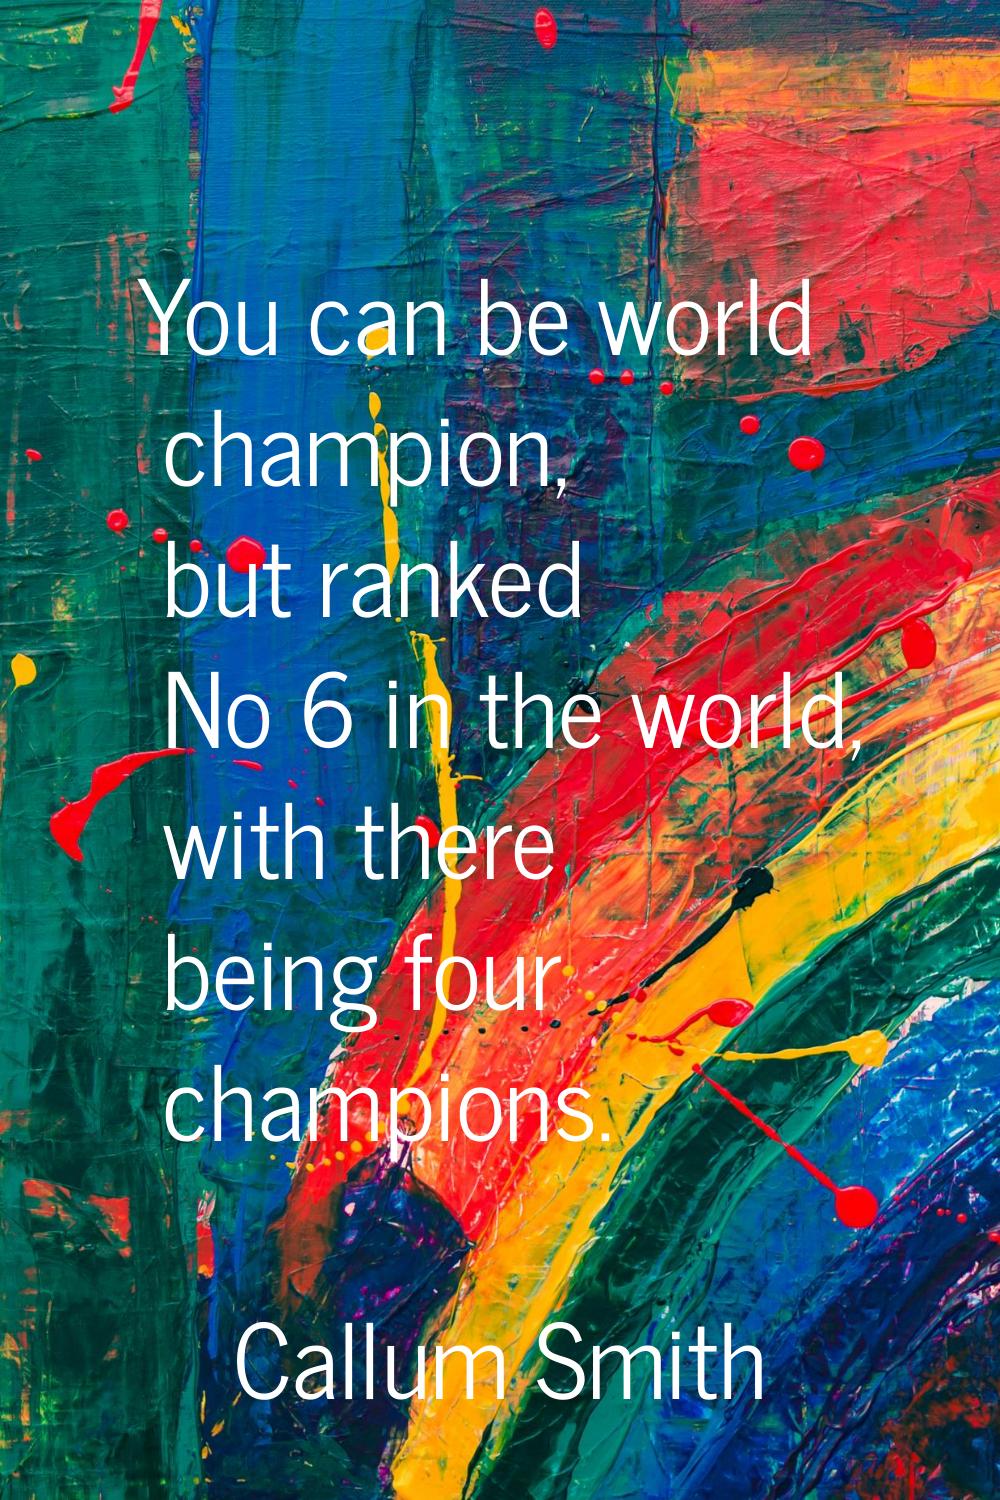 You can be world champion, but ranked No 6 in the world, with there being four champions.